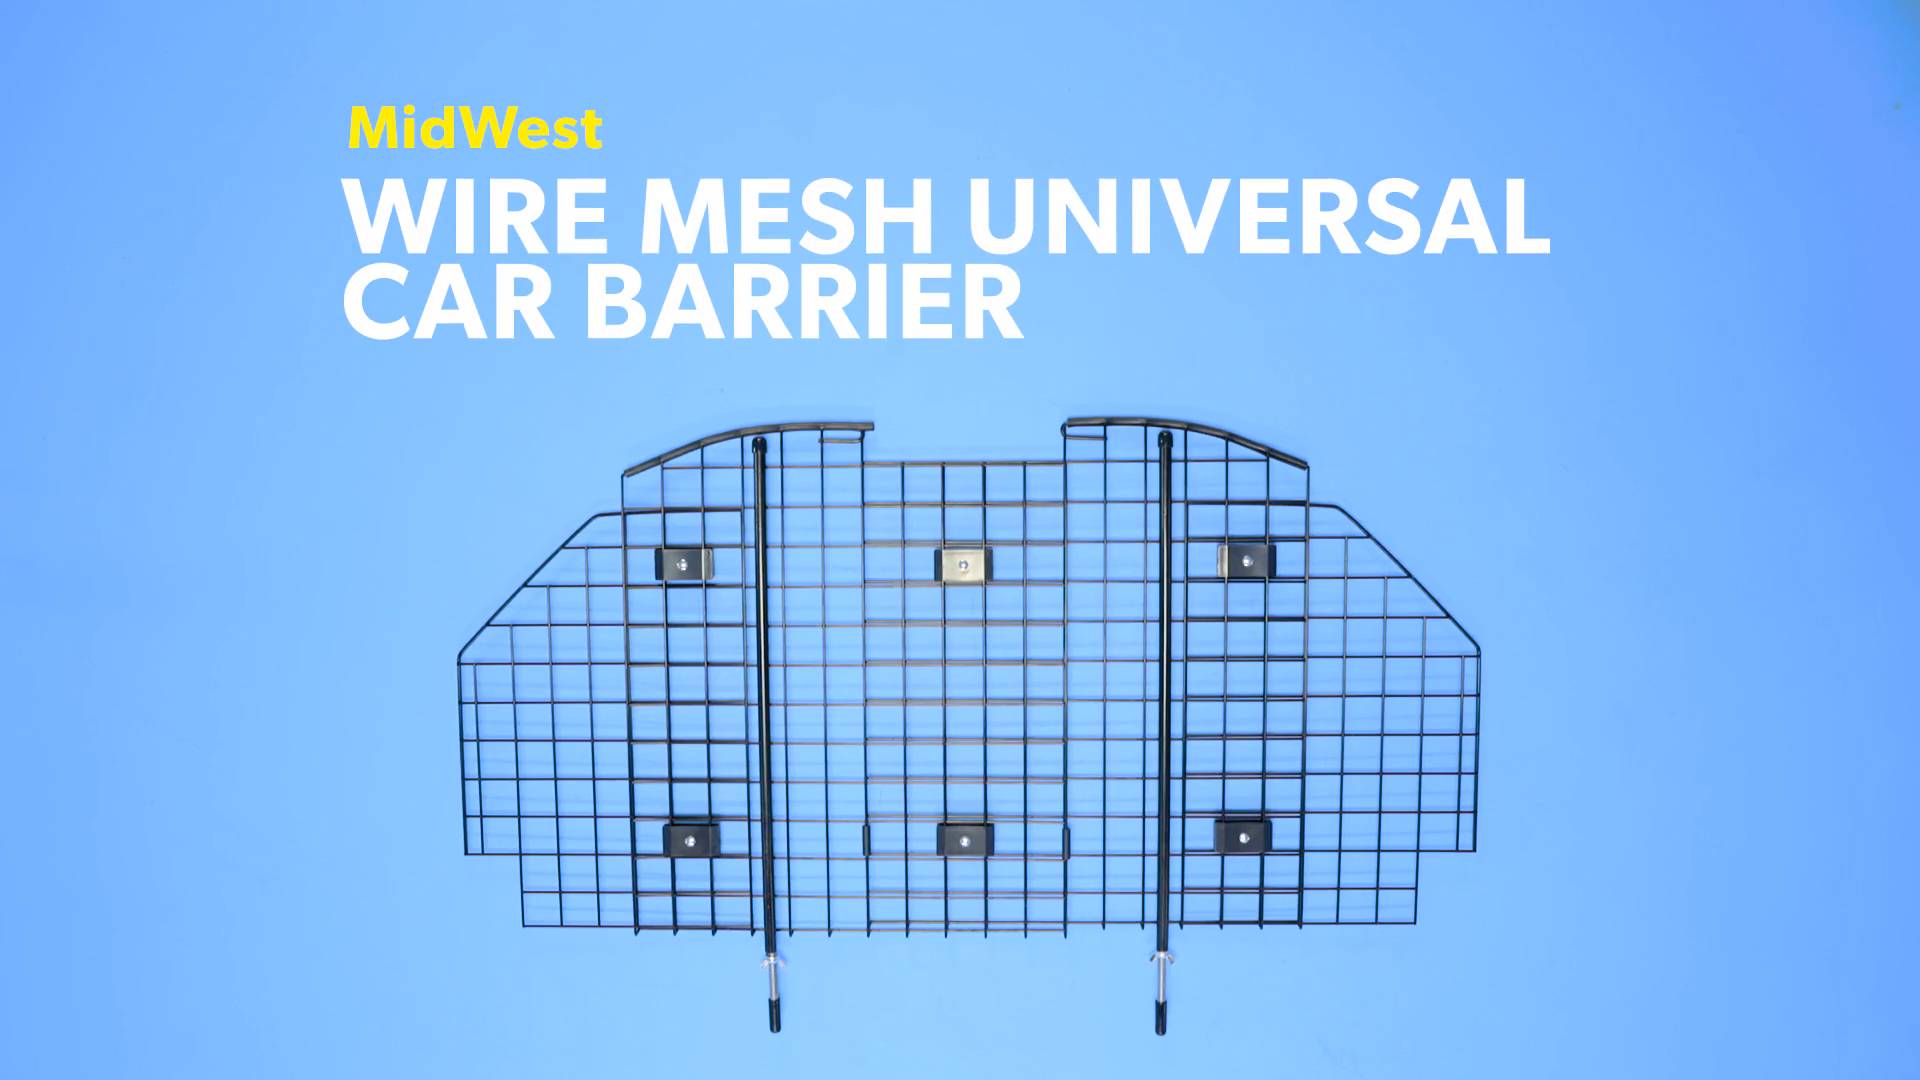 MIDWEST Wire Mesh Universal SUV Car Barrier - Chewy.com